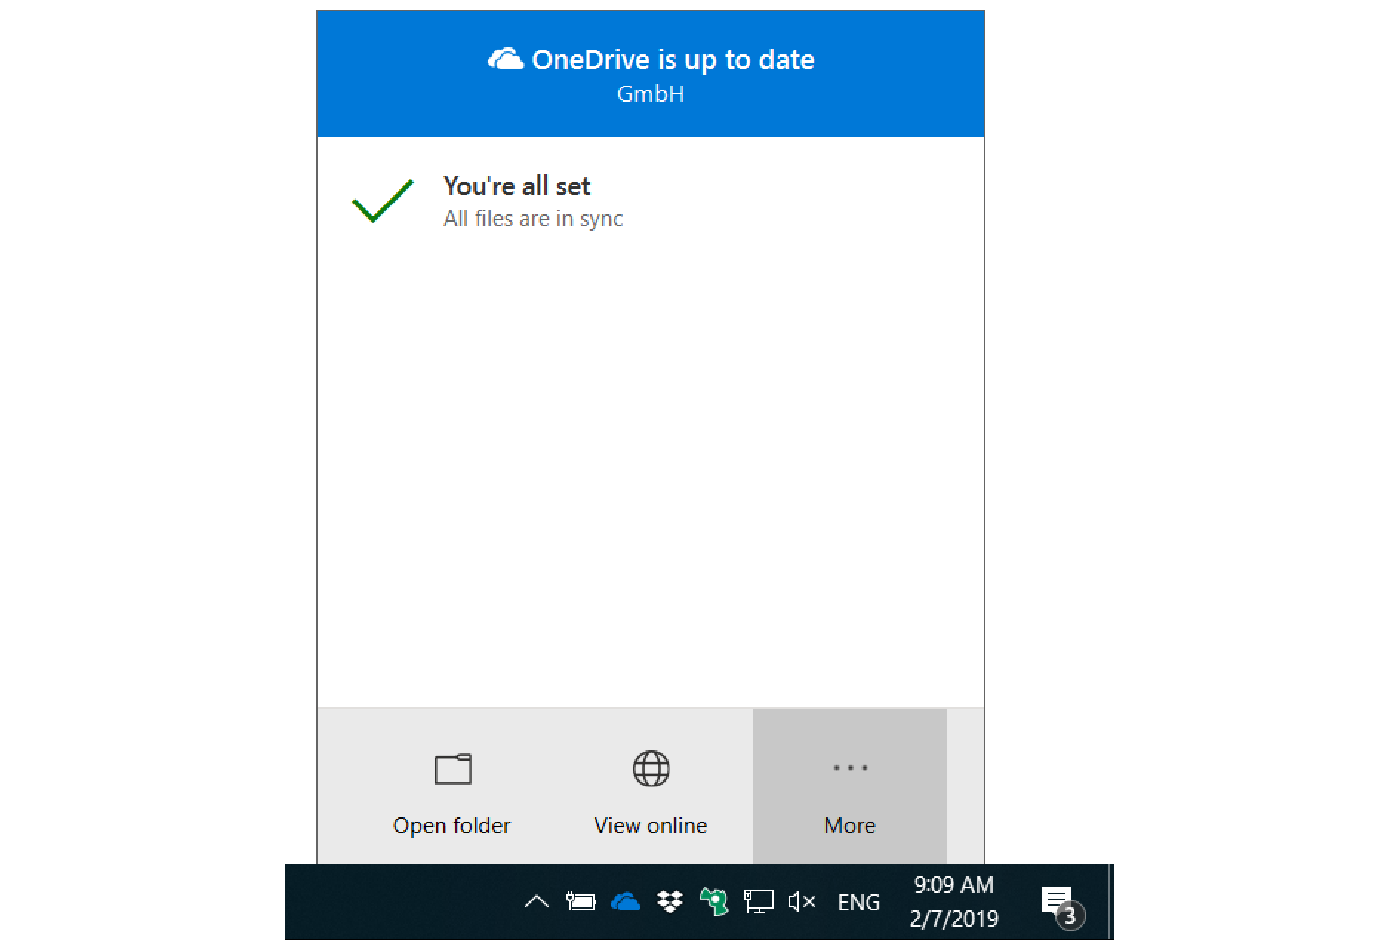 how to contact microsoft onedrive support